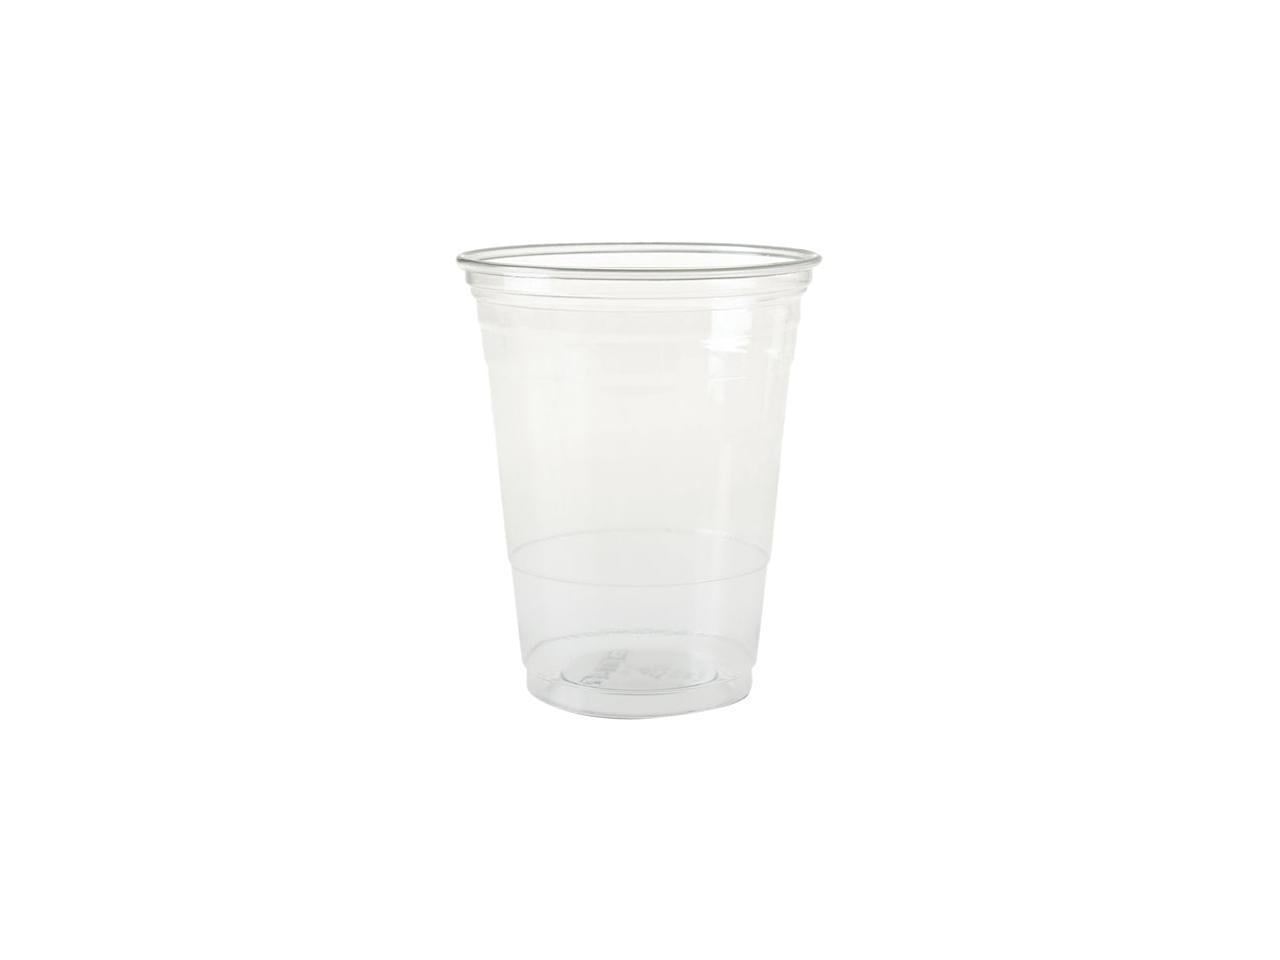 Chinet Cups, Crystal, 14 Ounce - 60 cups